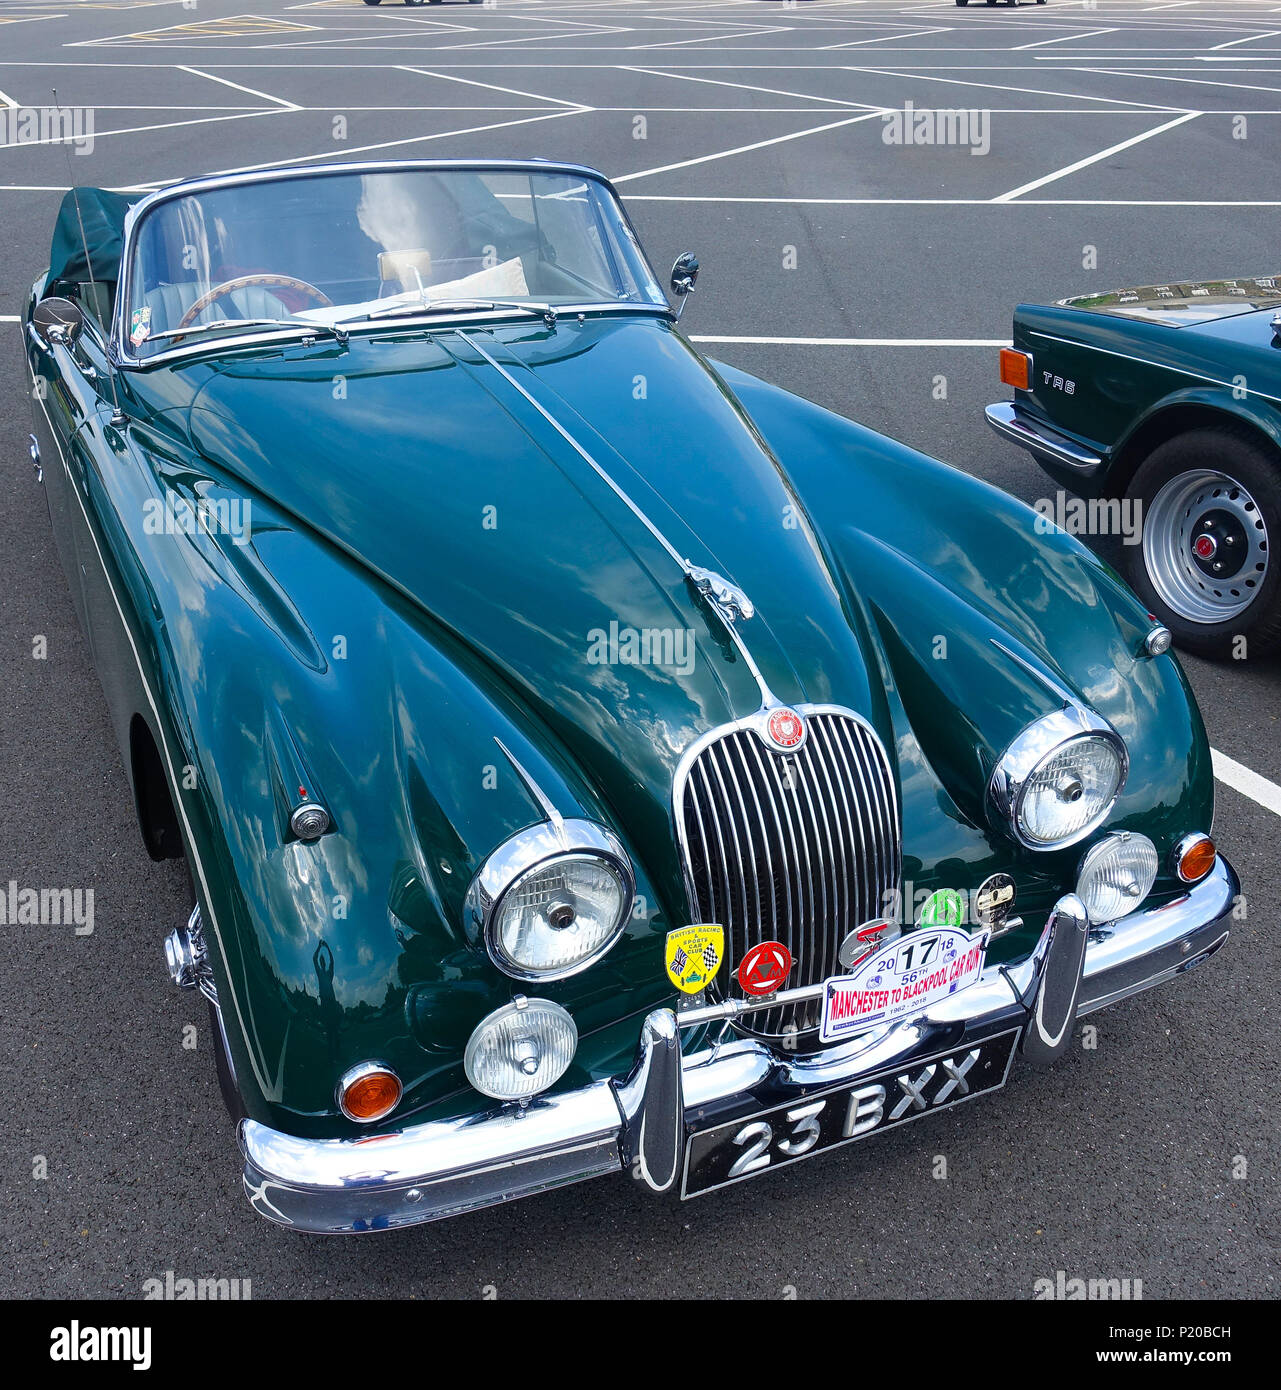 Classic Jaguar XK 150 sports car. At Fulwood Barracks, Preston, while taking part in the 56th Manchester to Blackpool car run 2018 Stock Photo